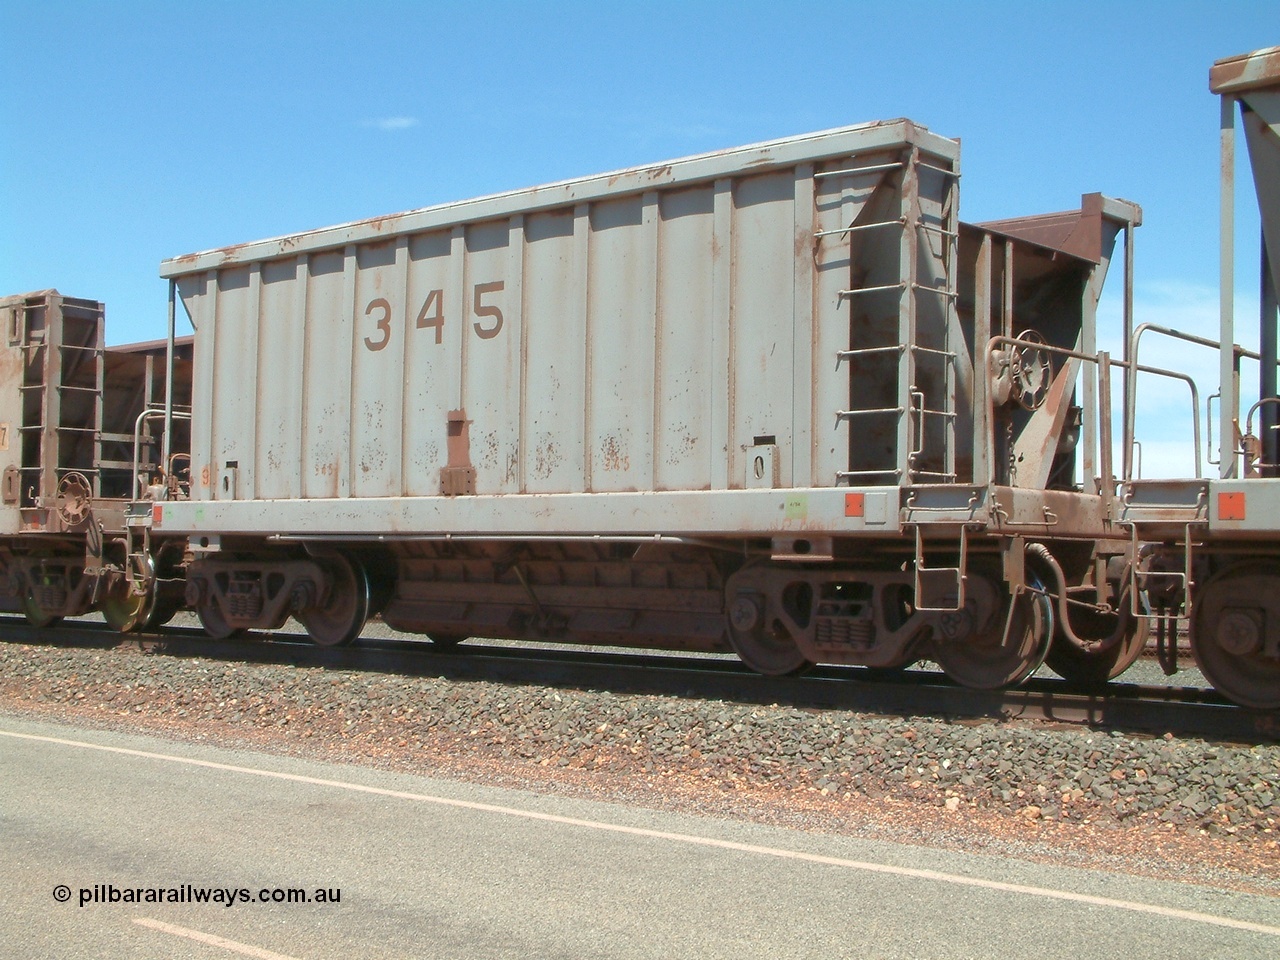 040409 123128
Boodarie, Goldsworthy service bottom discharge Portec USA built ore waggon 345 is one of ten that was purchased second hand in 1992 from Phelps Dodge Copper Mine, believed to be built in 1980s. 9th April 2004.
Keywords: 345;Portec-USA;BHP-ore-waggon;